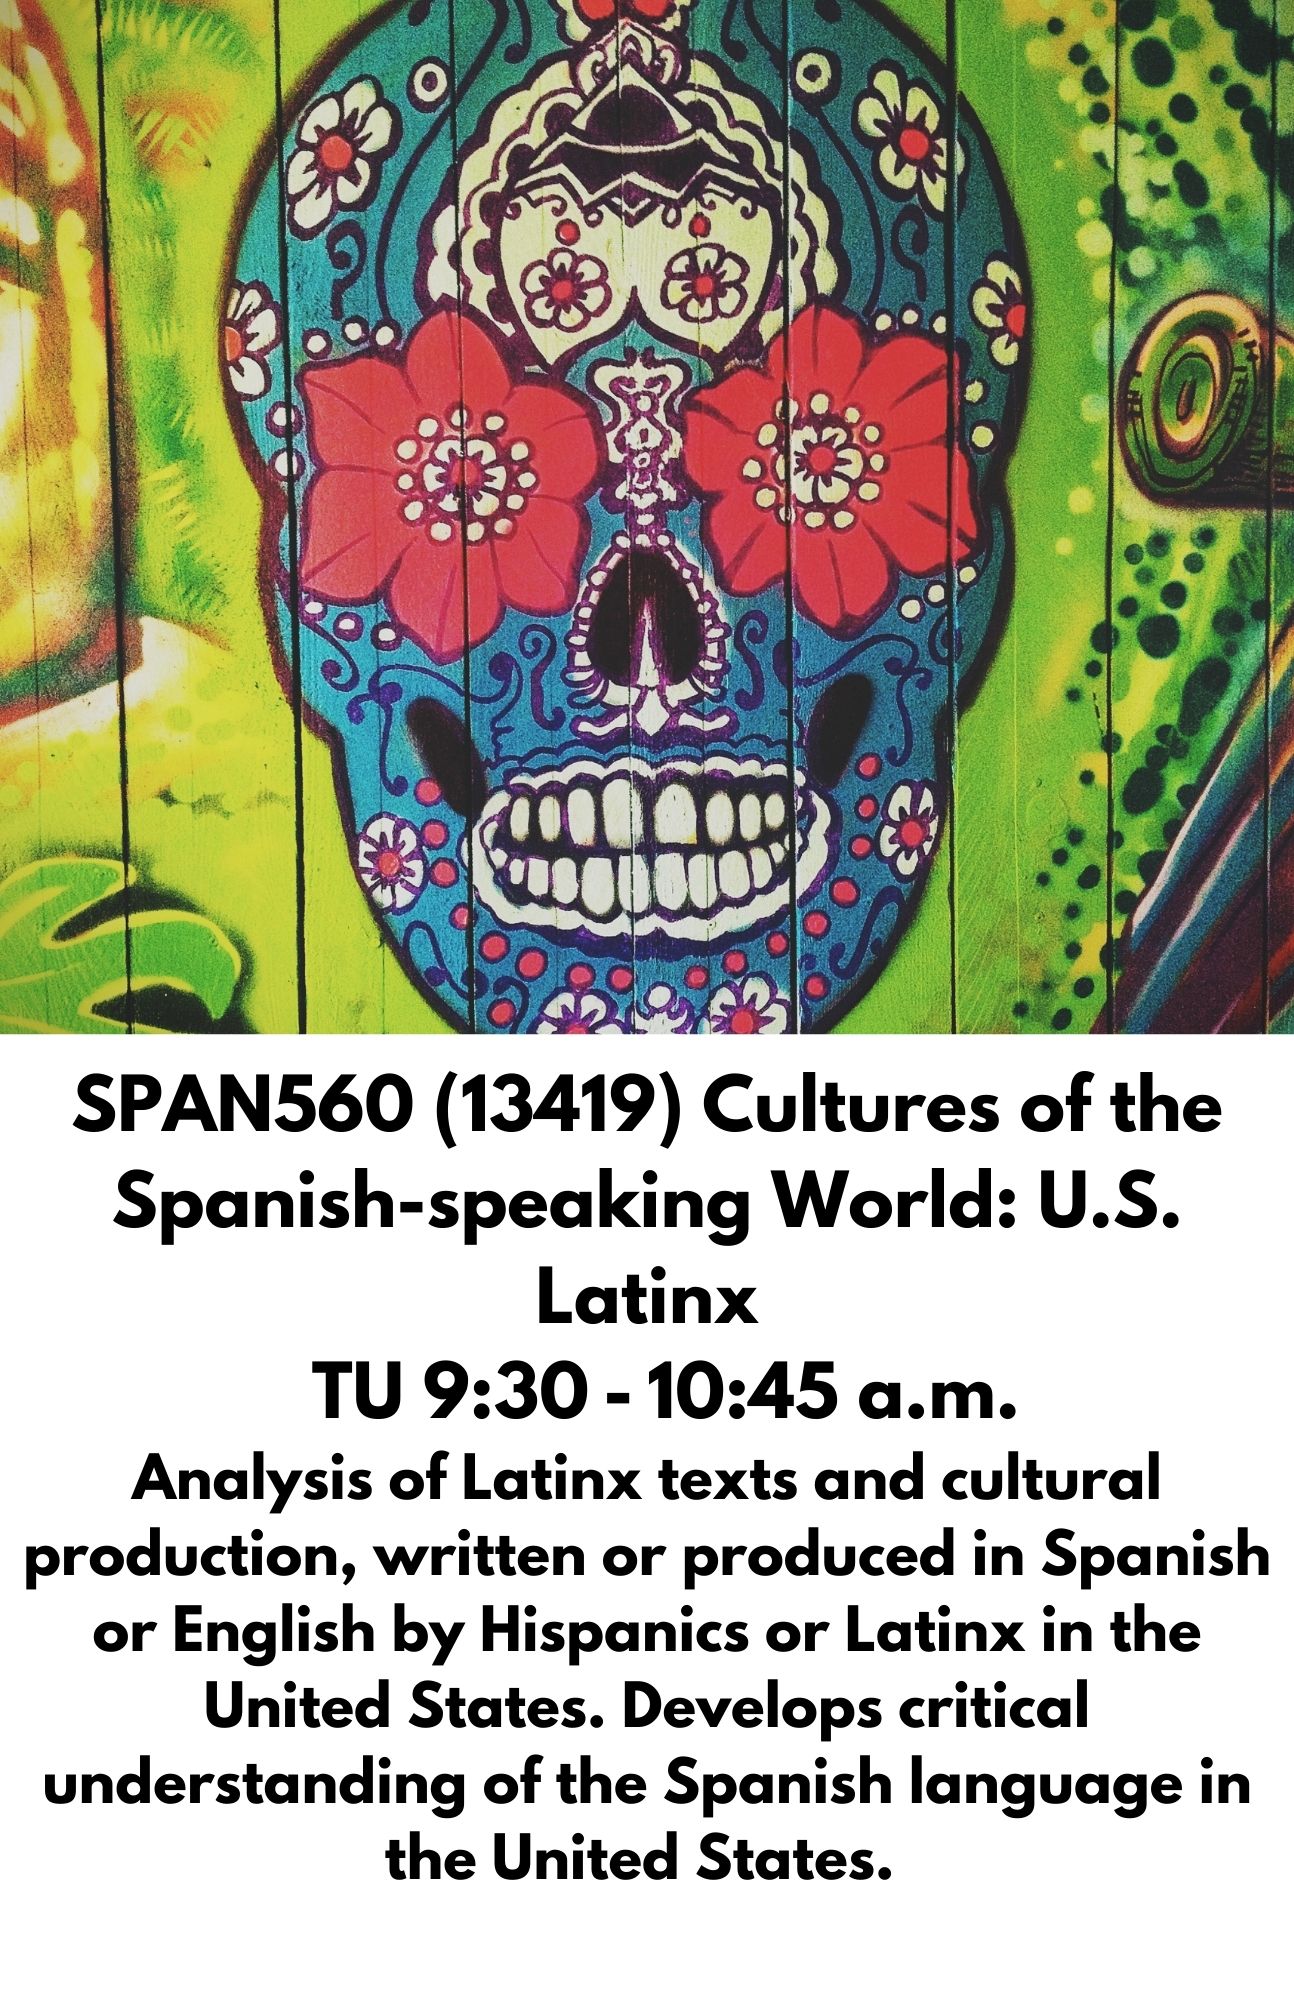 SPAN560 (13419) Cultures of the Spanish-speaking World: U.S. Latinx   TU 9:30 - 10:45 a.m. Analysis of Latinx texts and cultural production, written or produced in Spanish or English by Hispanics or Latinx in the United States. Develops critical understanding of the Spanish language in the United States.